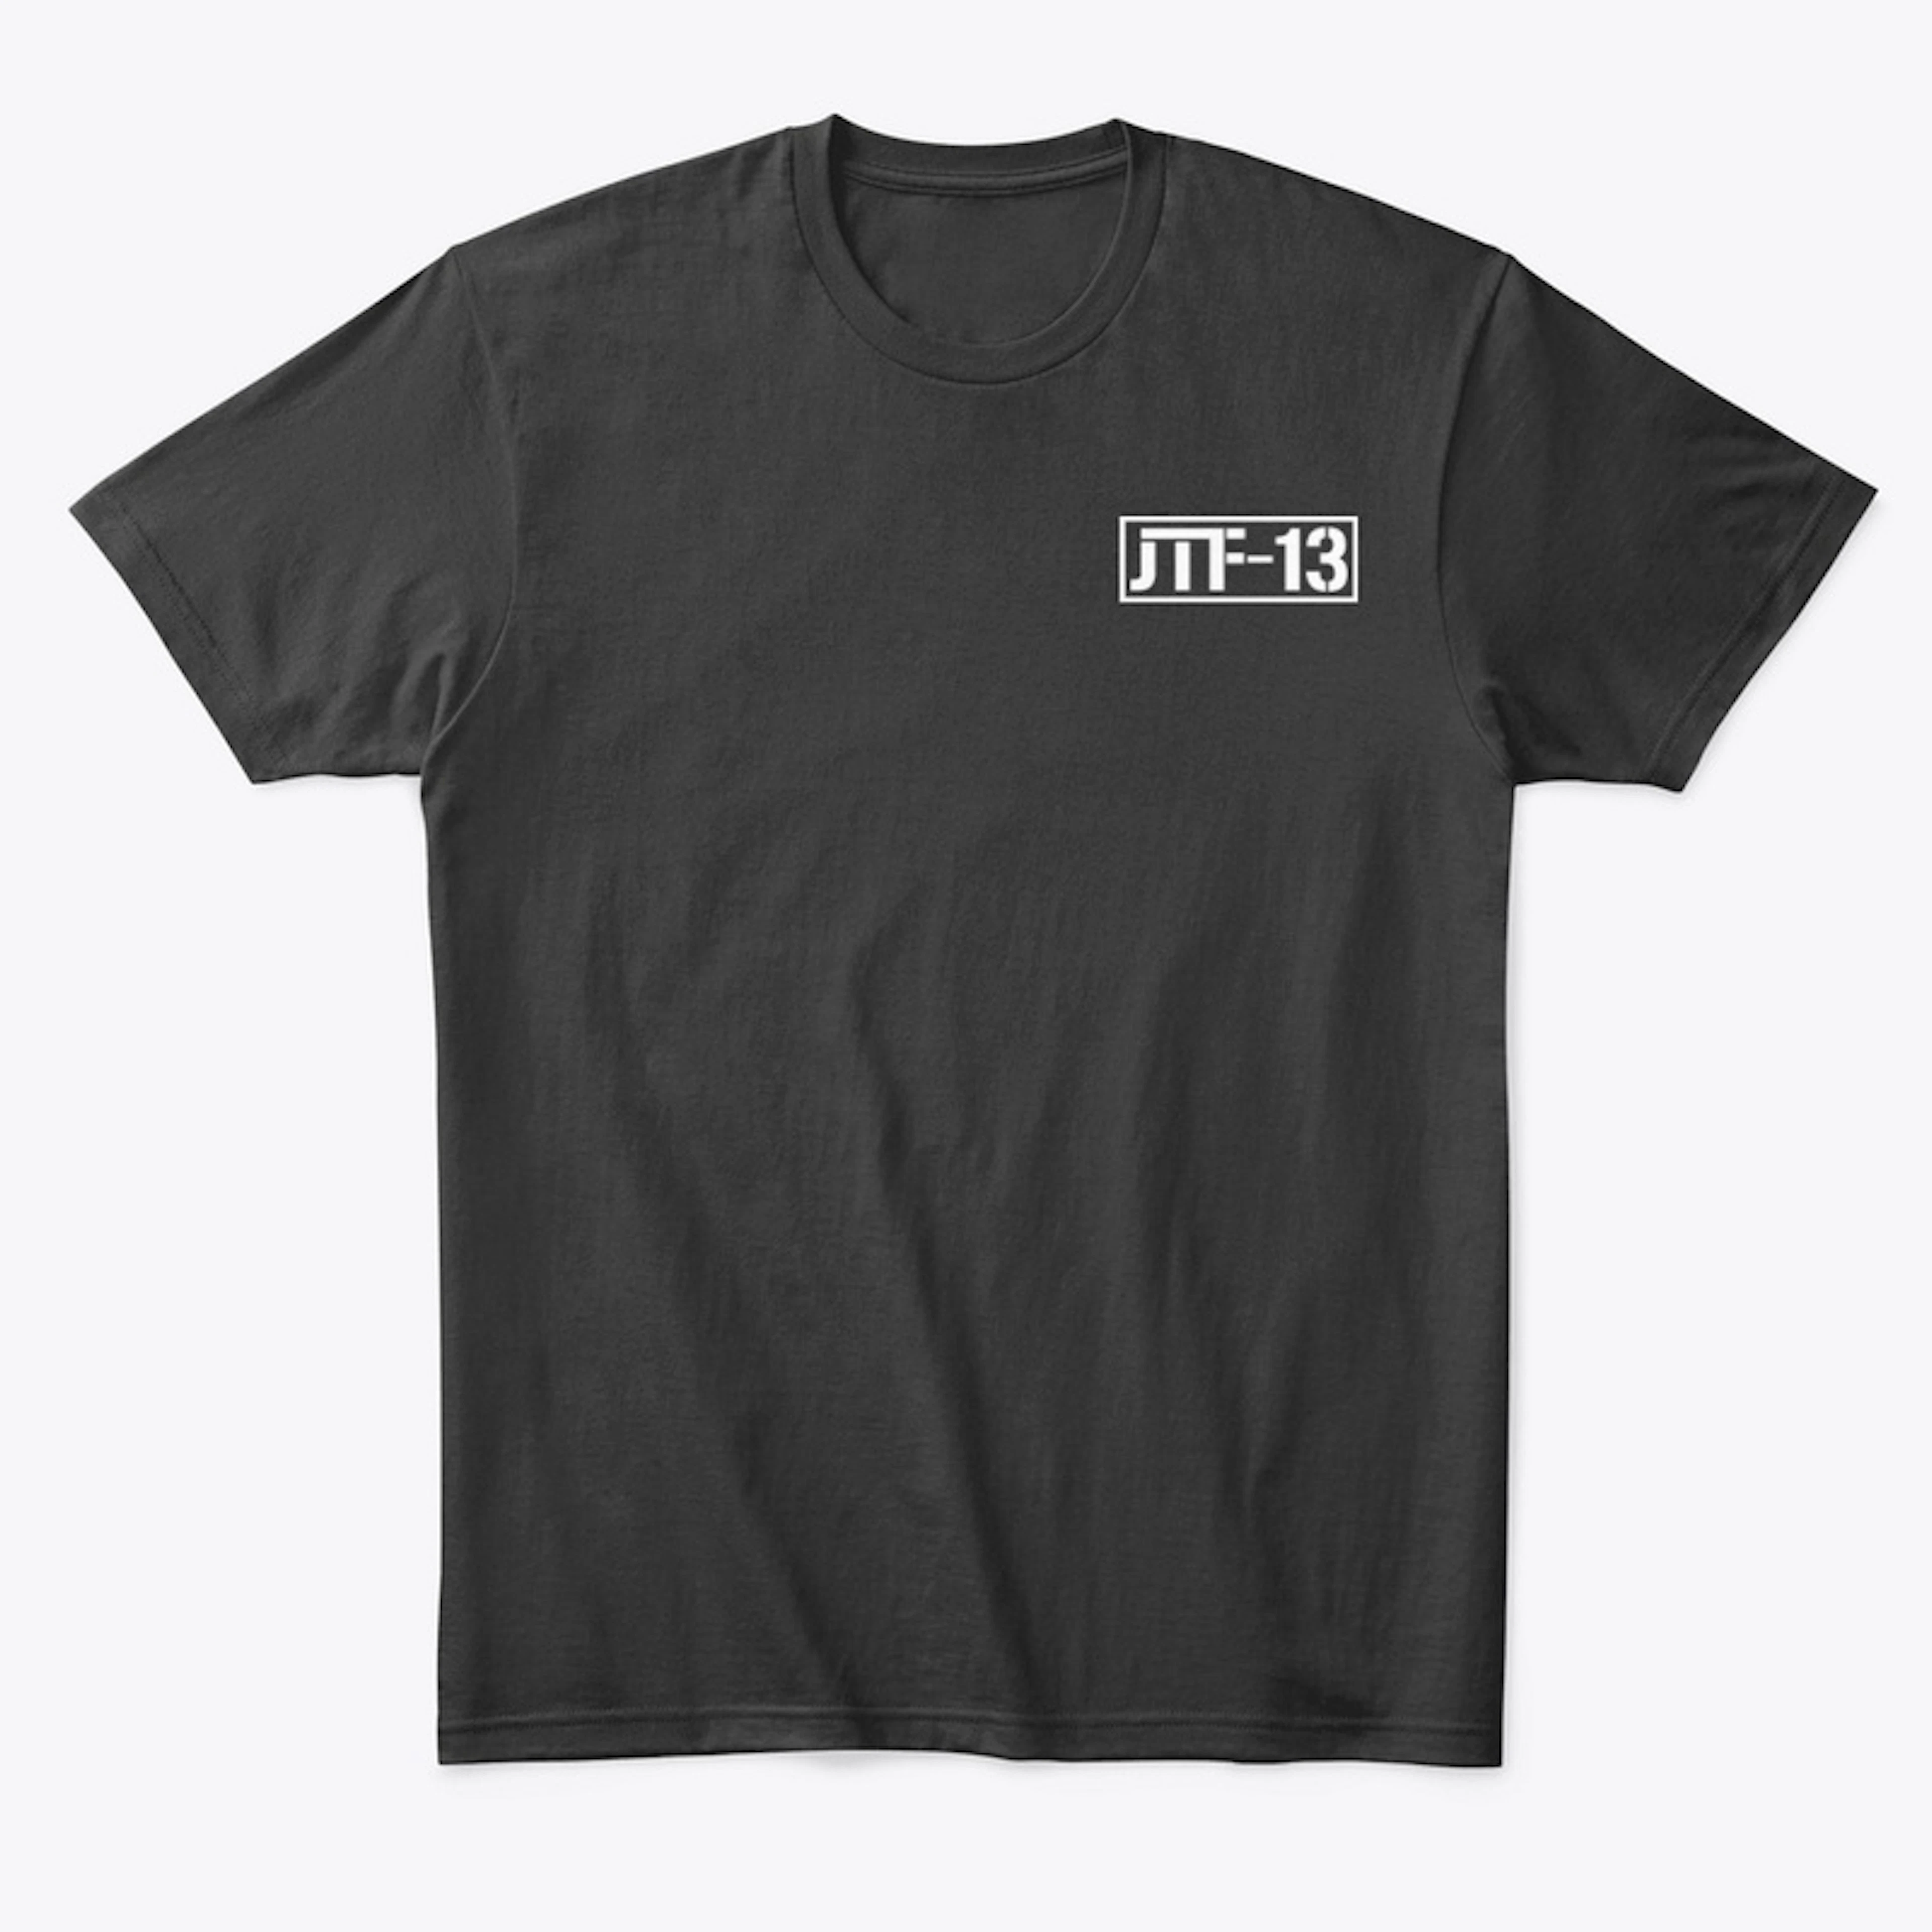 Black T-Shirt with JTF-13 Brand and Logo